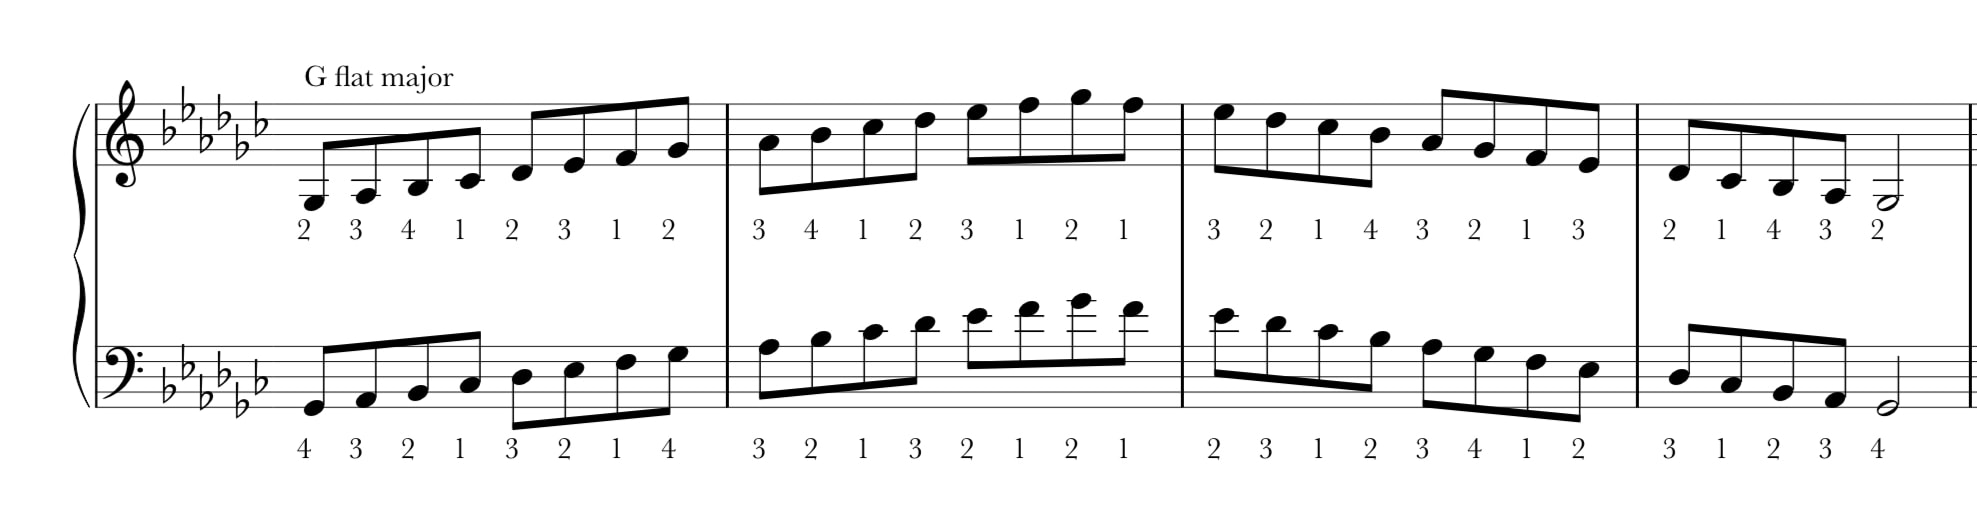 notes in g flat major scale